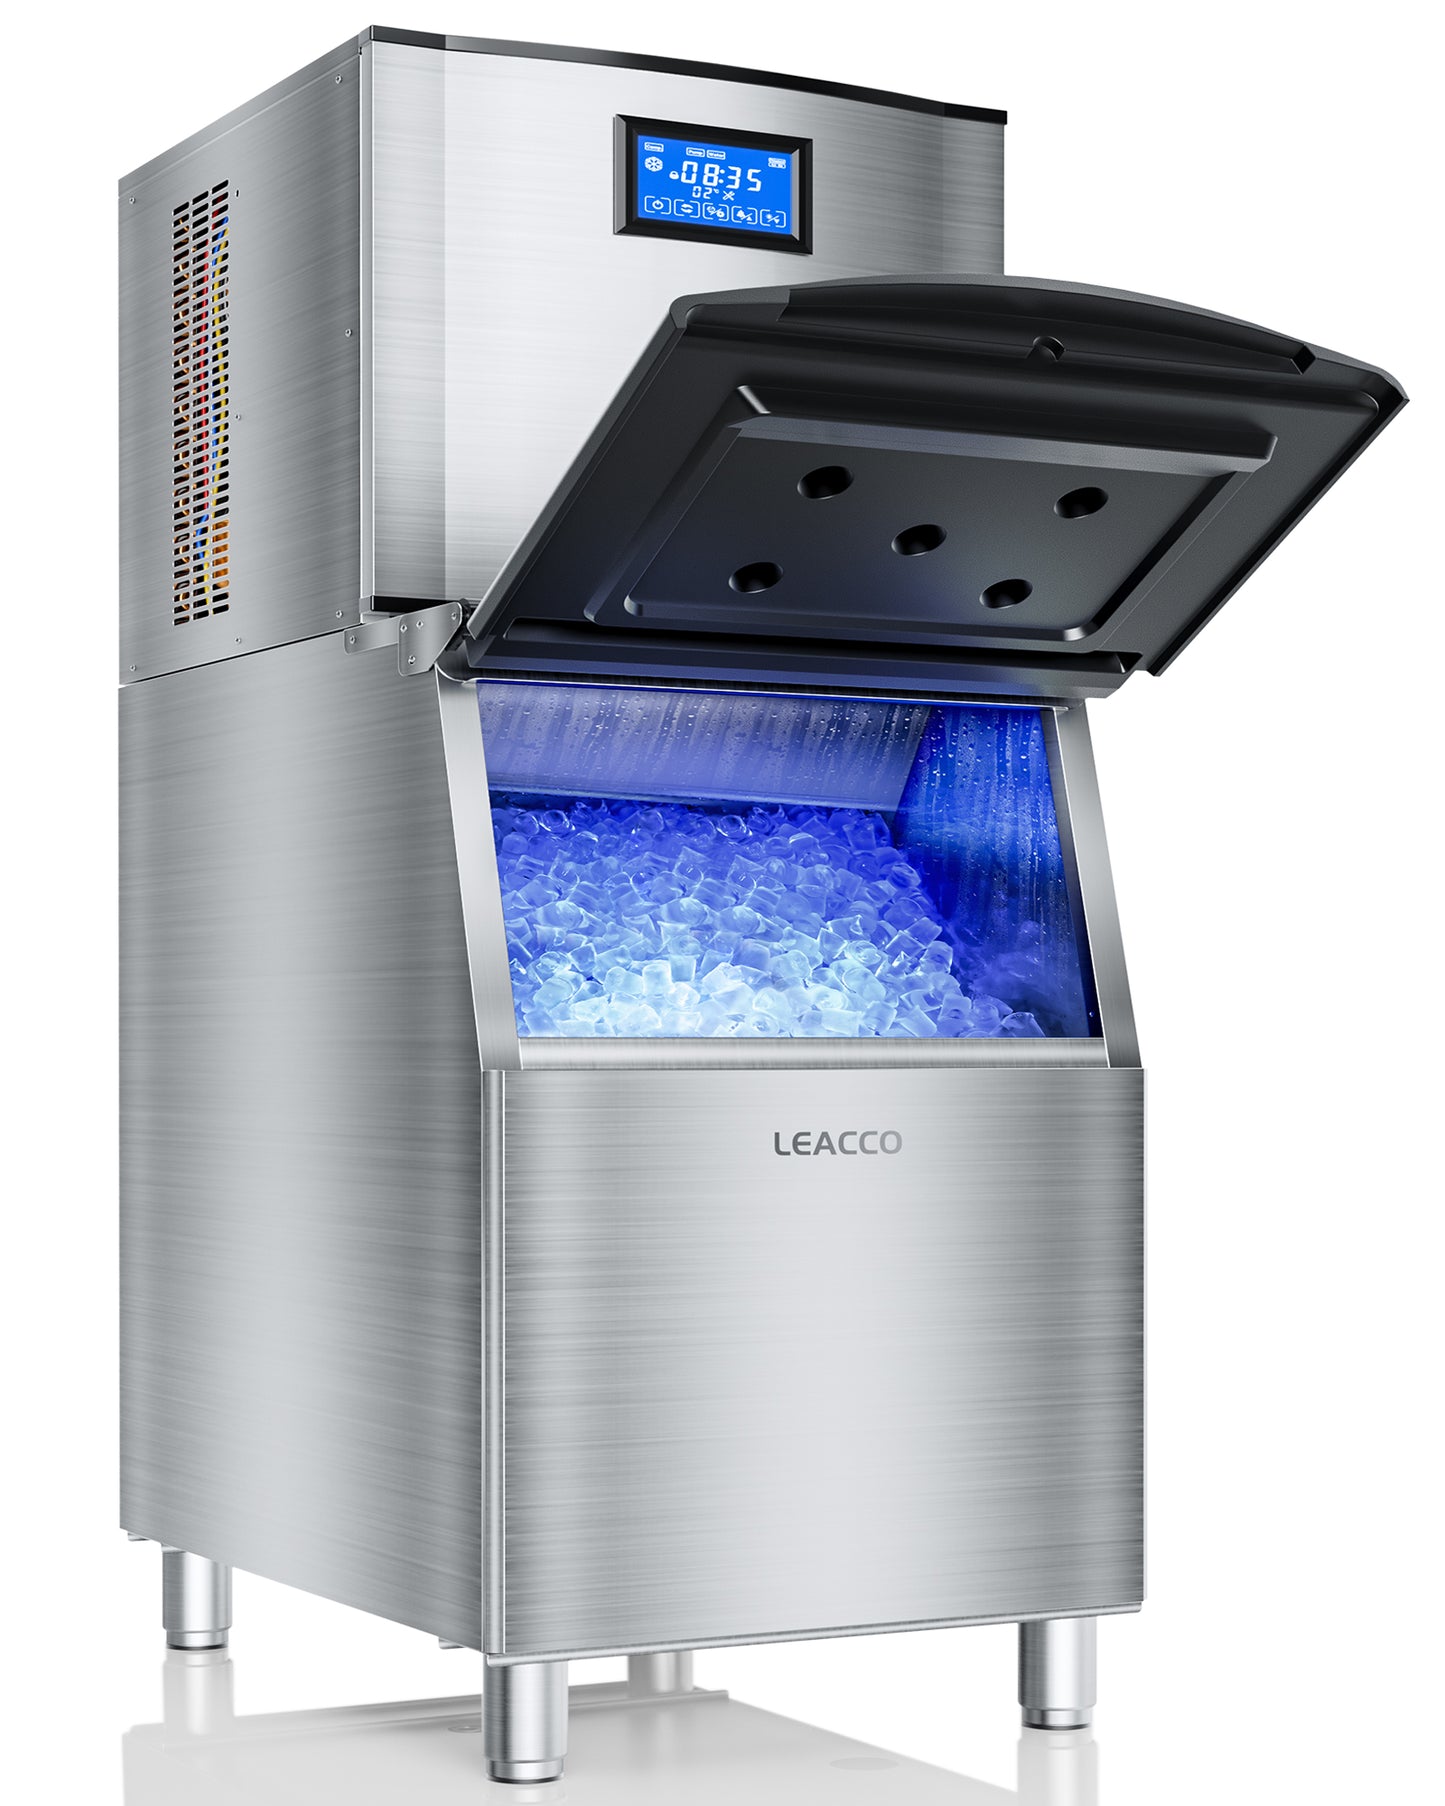 Leacco Commercial Ice Maker Machine 550LBS/24H with 330LBS Stainless Steel Storage Bin, Air Cooled Modular Ice Cube Machine, 1200W